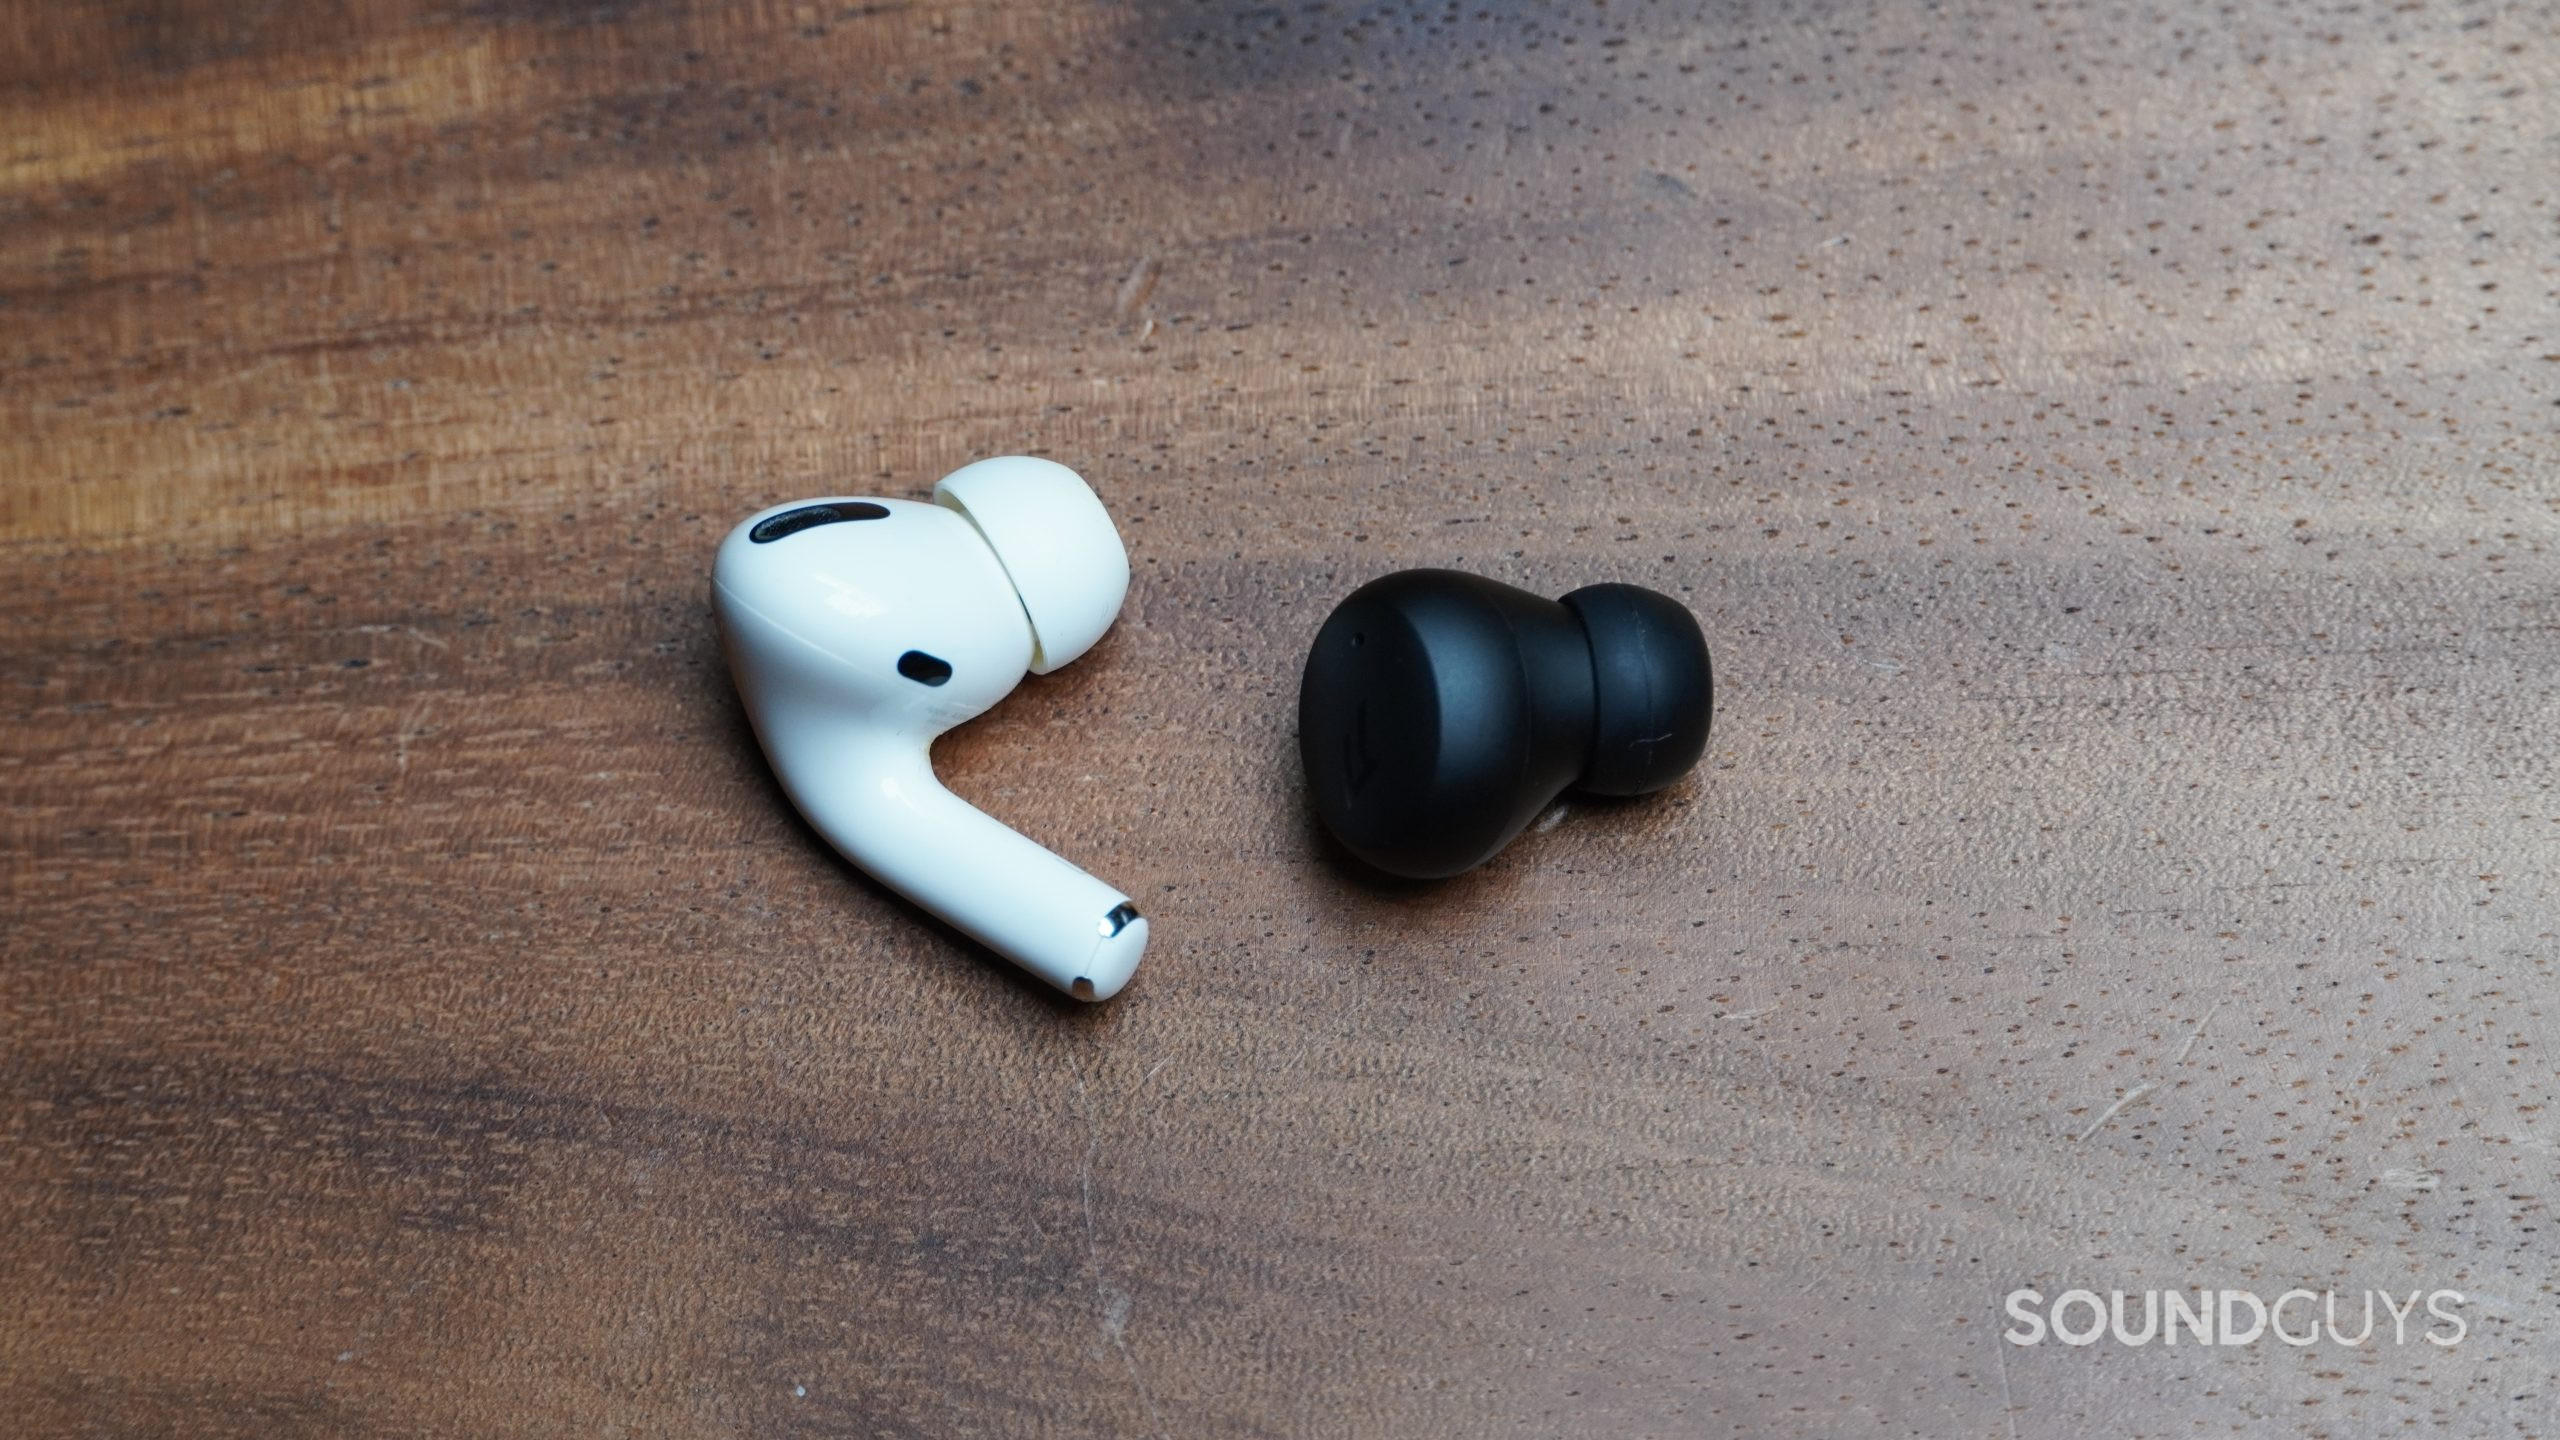 1MORE ComfoBuds Mini next to Apple AirPods Pro earbud